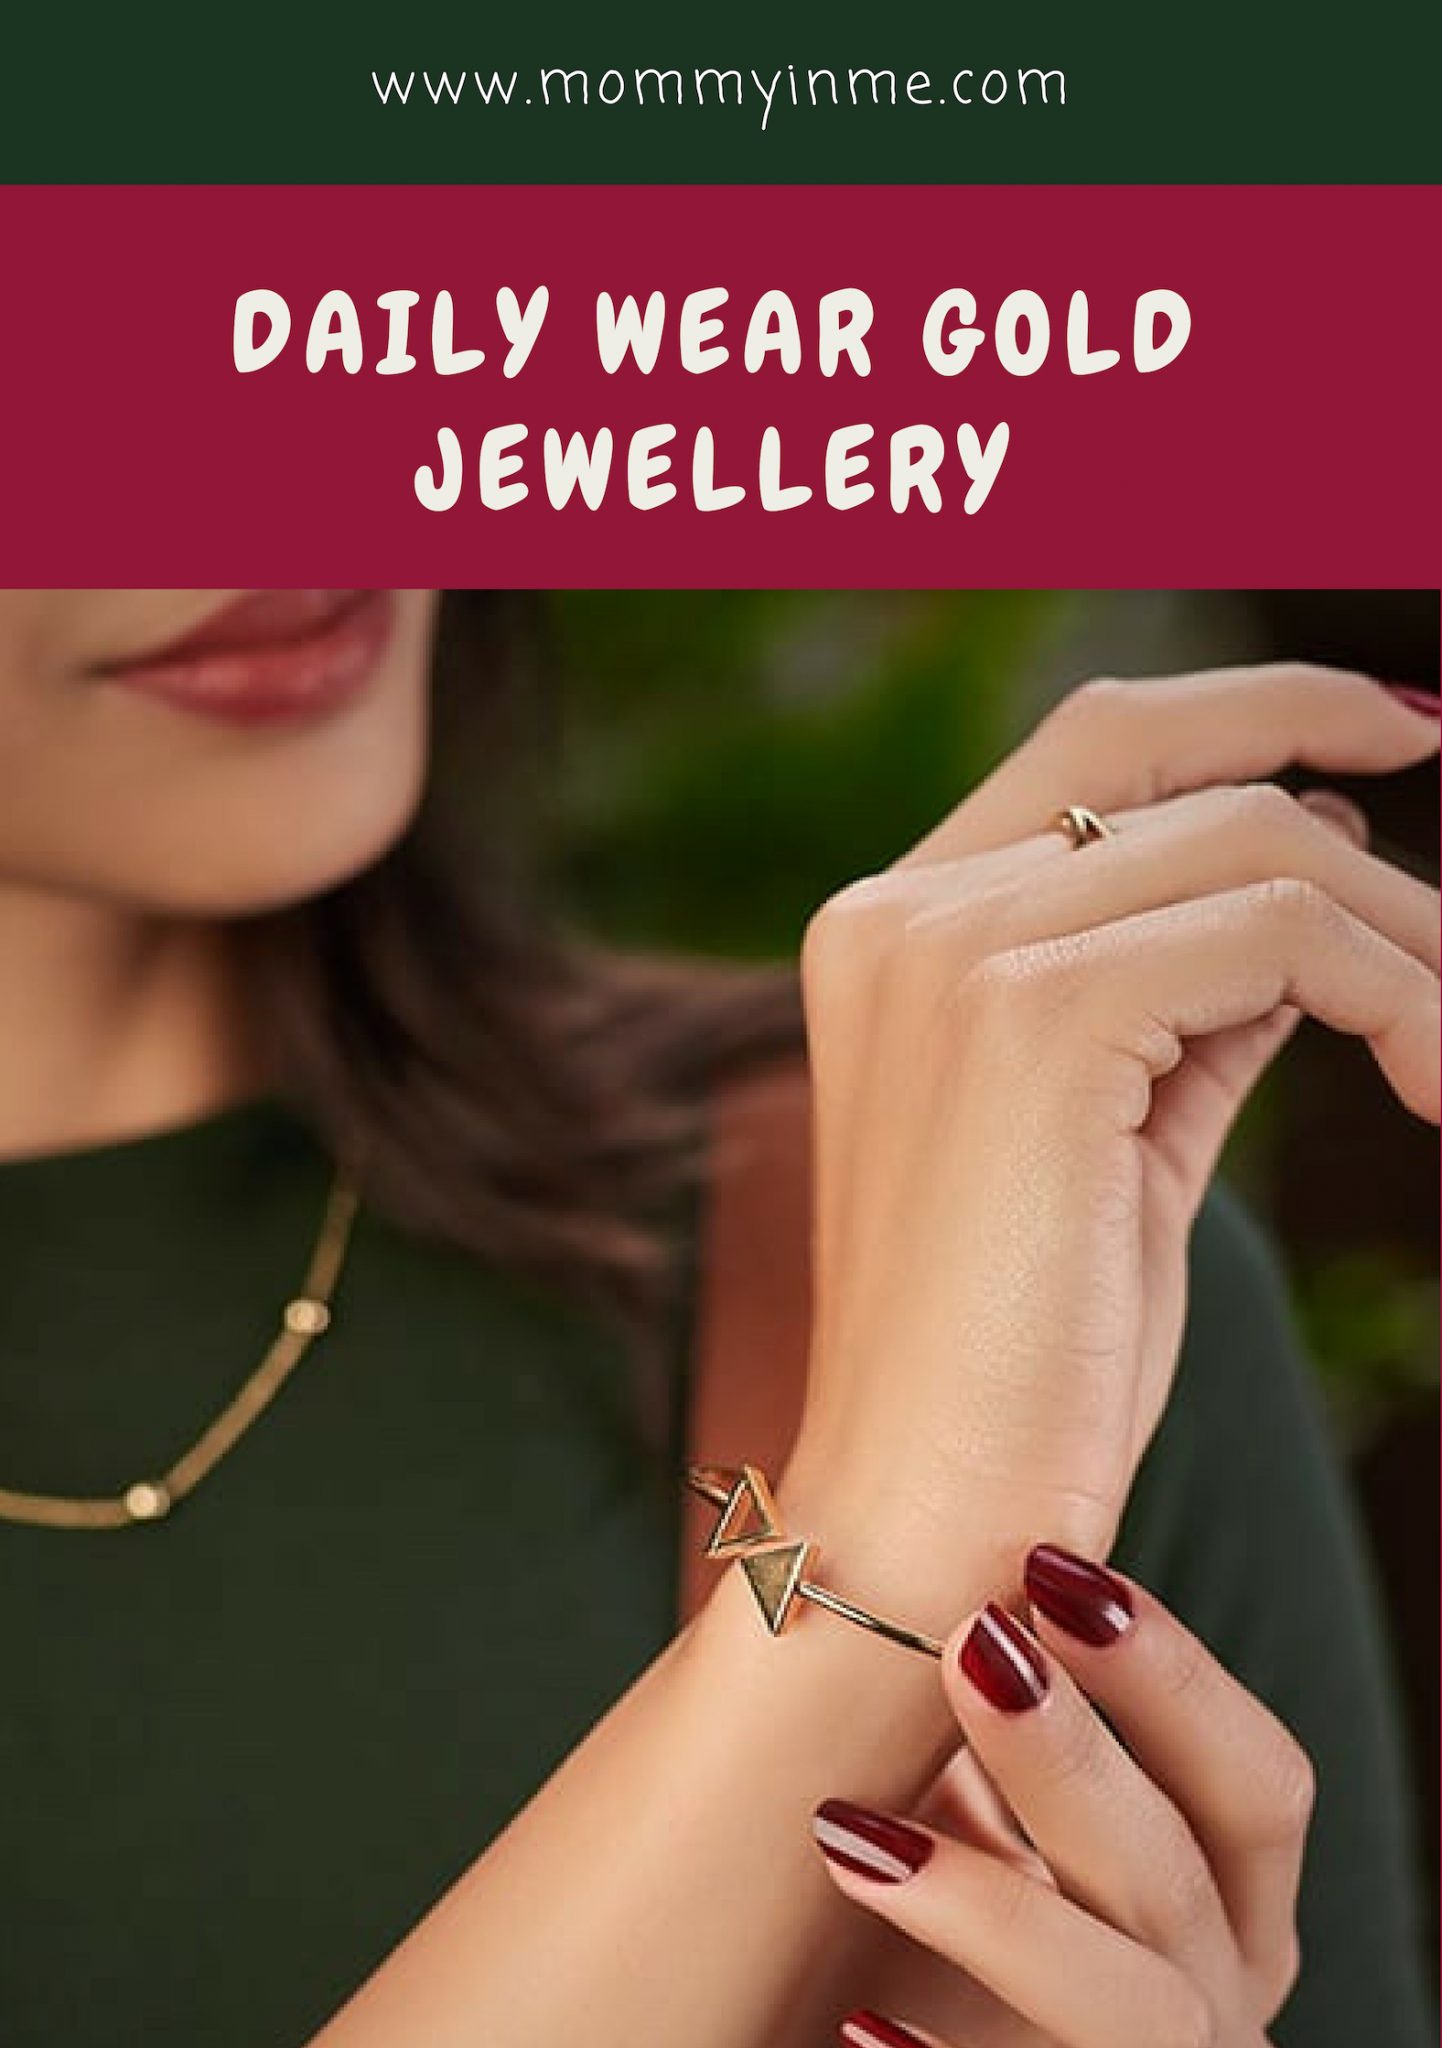 We all love Jewellery in the Modern times, so here are some ways that you can incorporate some precious yet delicate jewellery in your daily lives. Visit Melorra for some amazing jewellery. #jewellery #melorra #onlinejewellery #modernwoman #diamonds #Goldjewellery